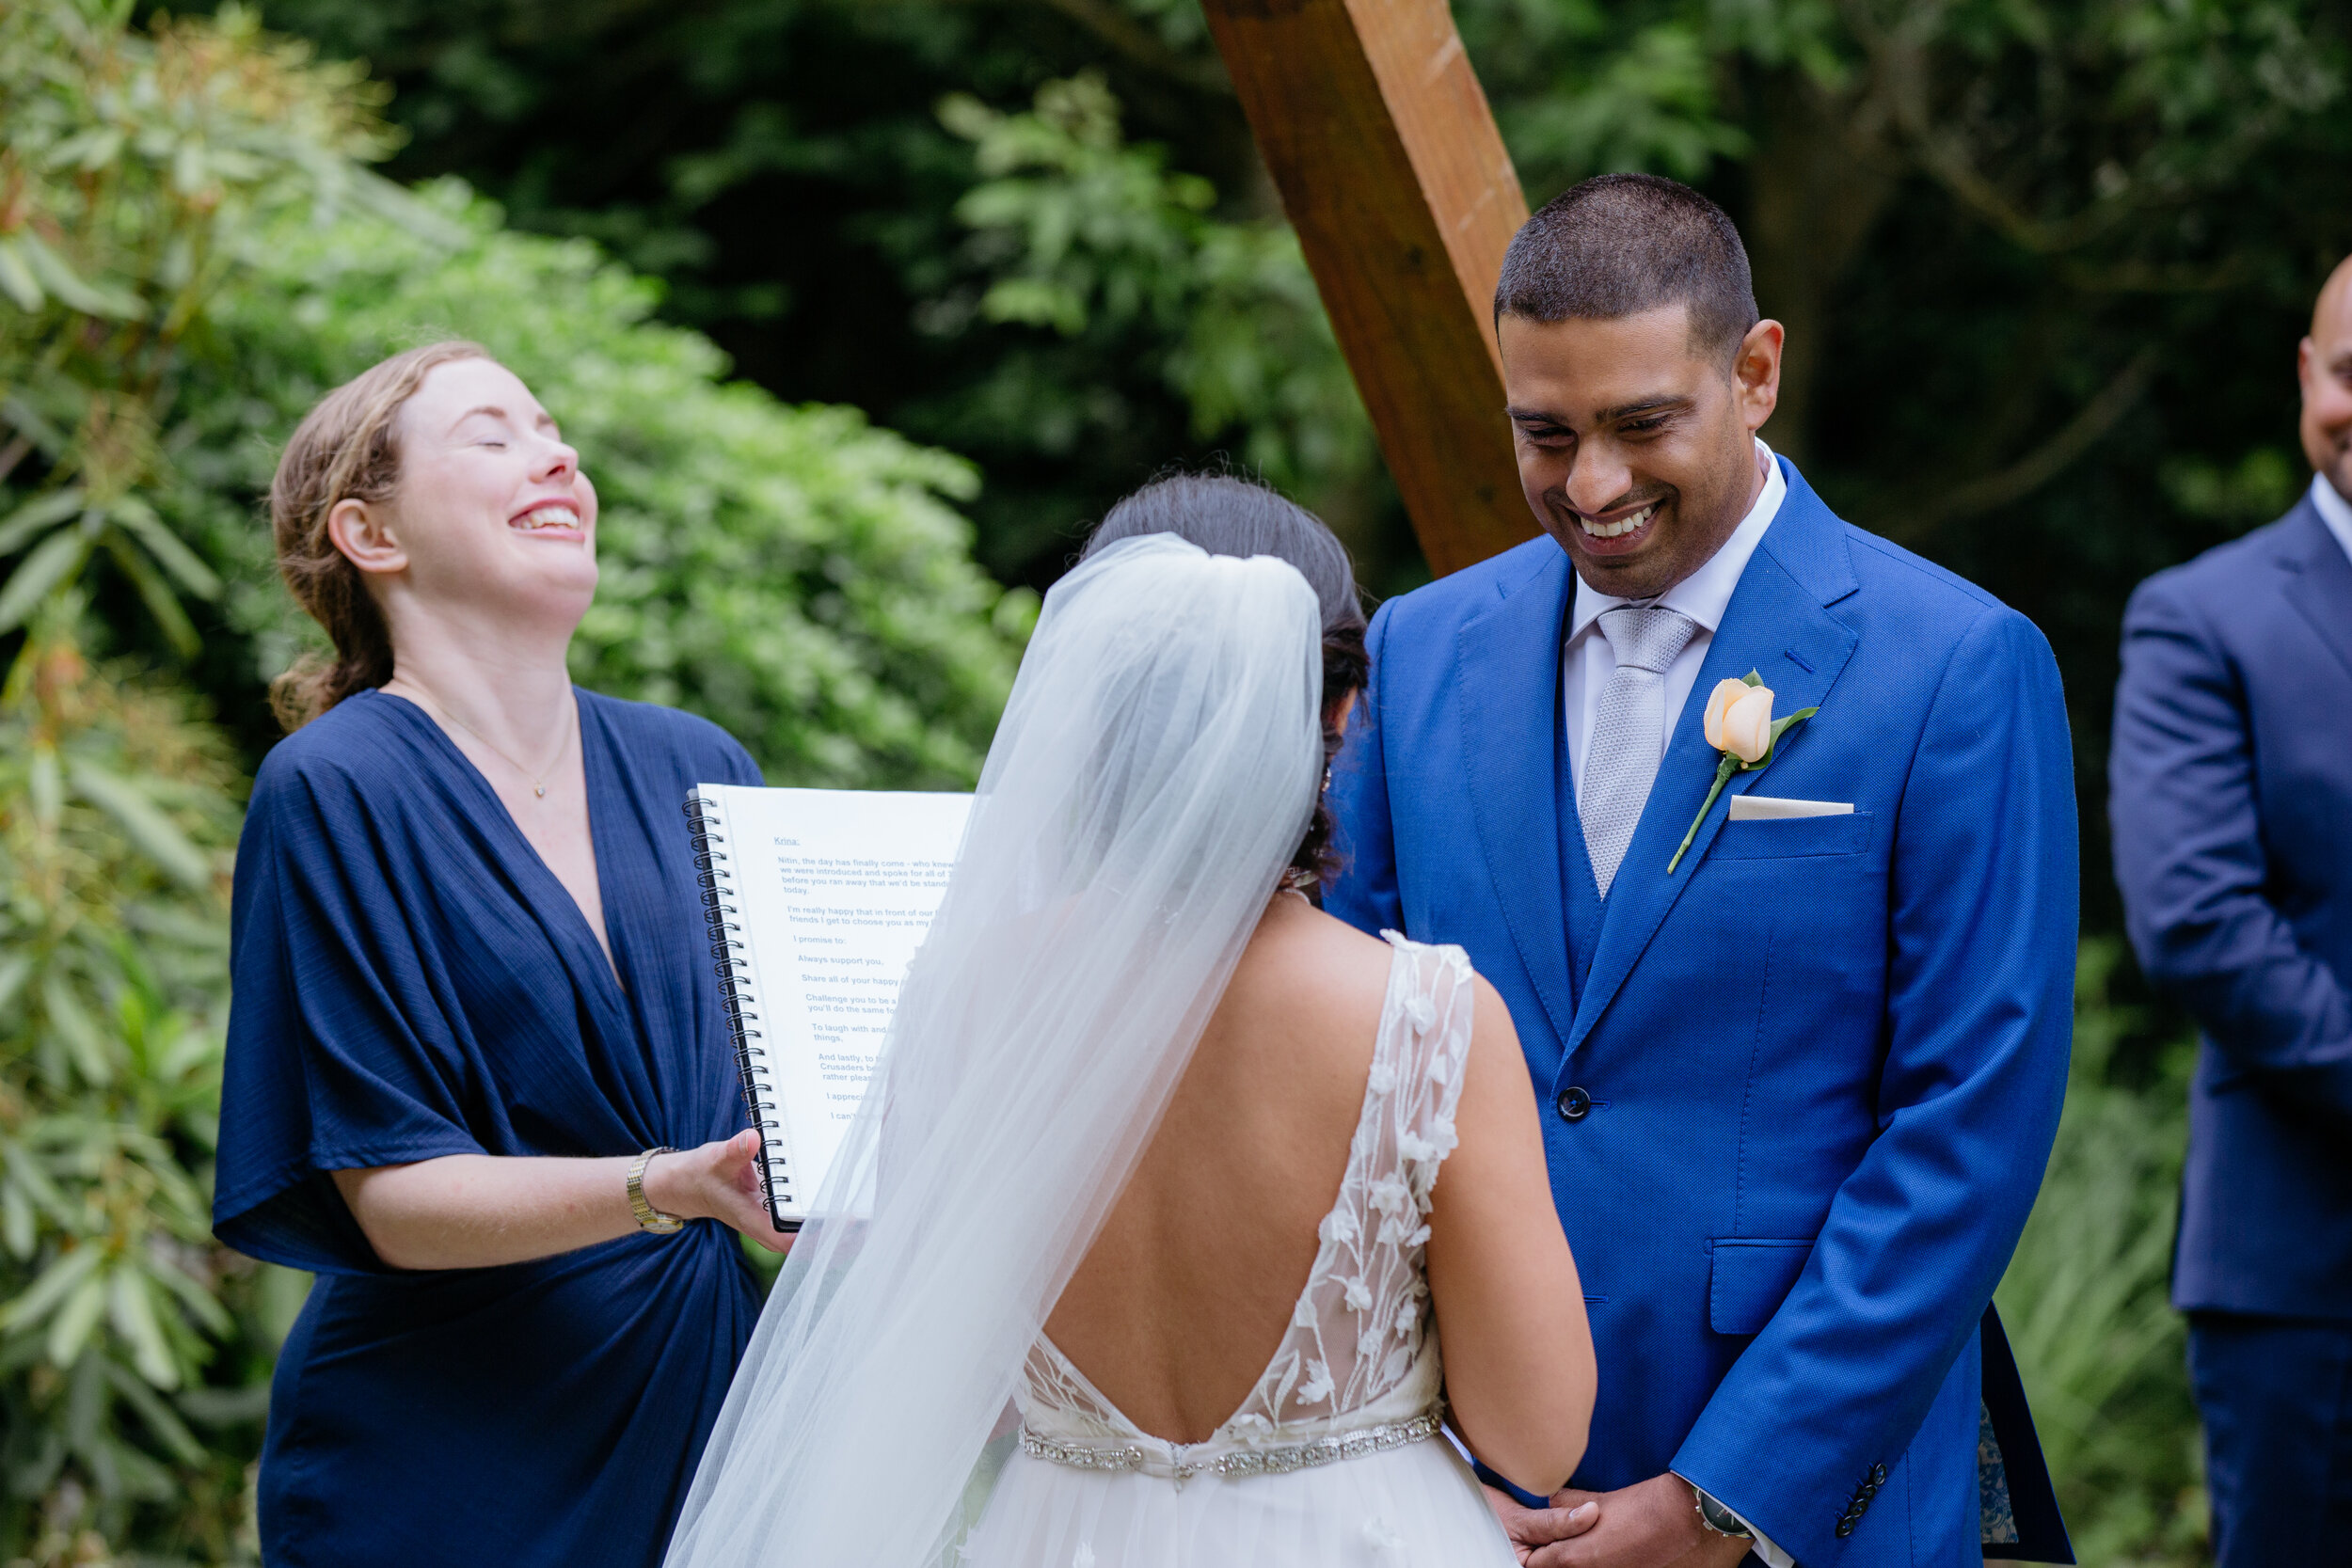 Celebrant laughing as Bride and Groom exchange vows